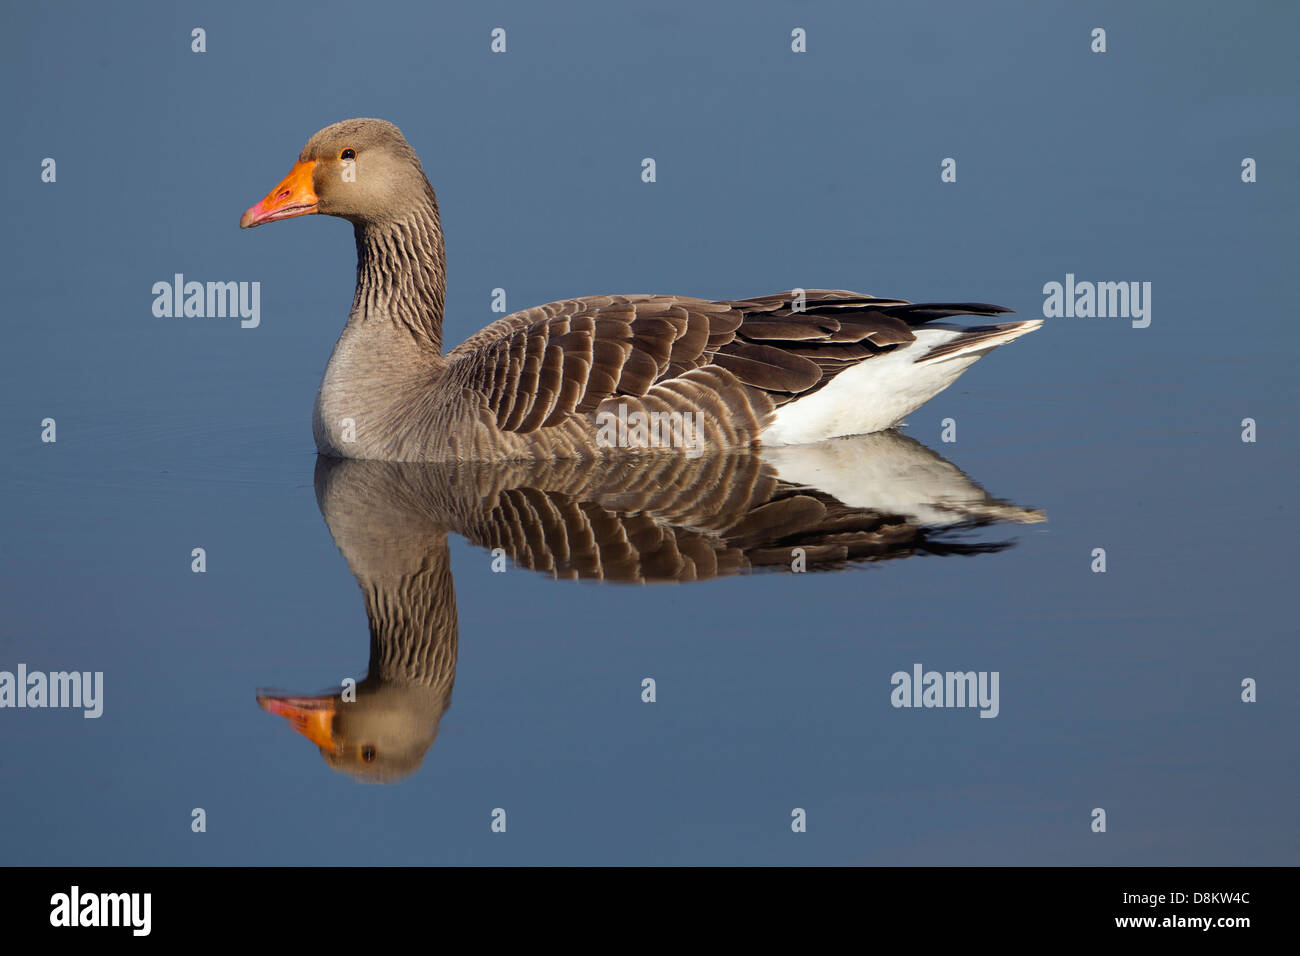 Greylag Goose Anser anser reflected in water on a calm day Stock Photo